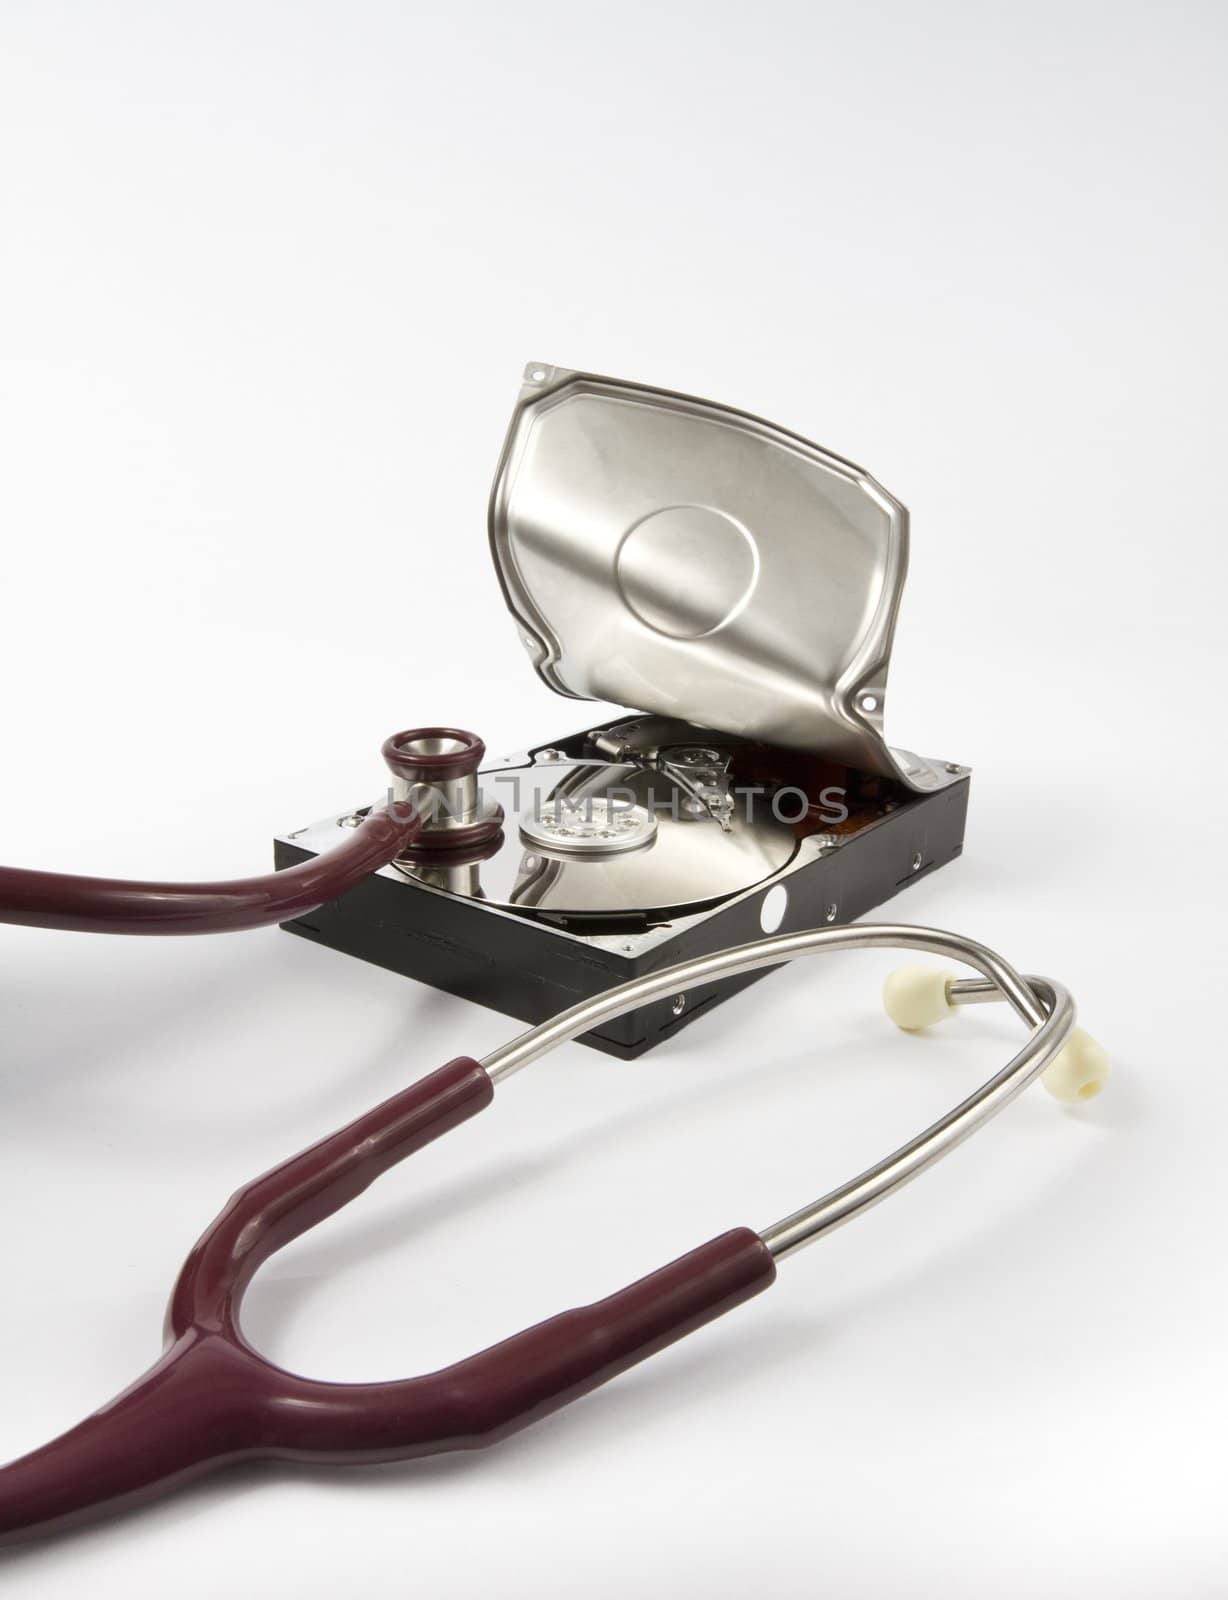 Open hard drive with stethoscope by gewoldi